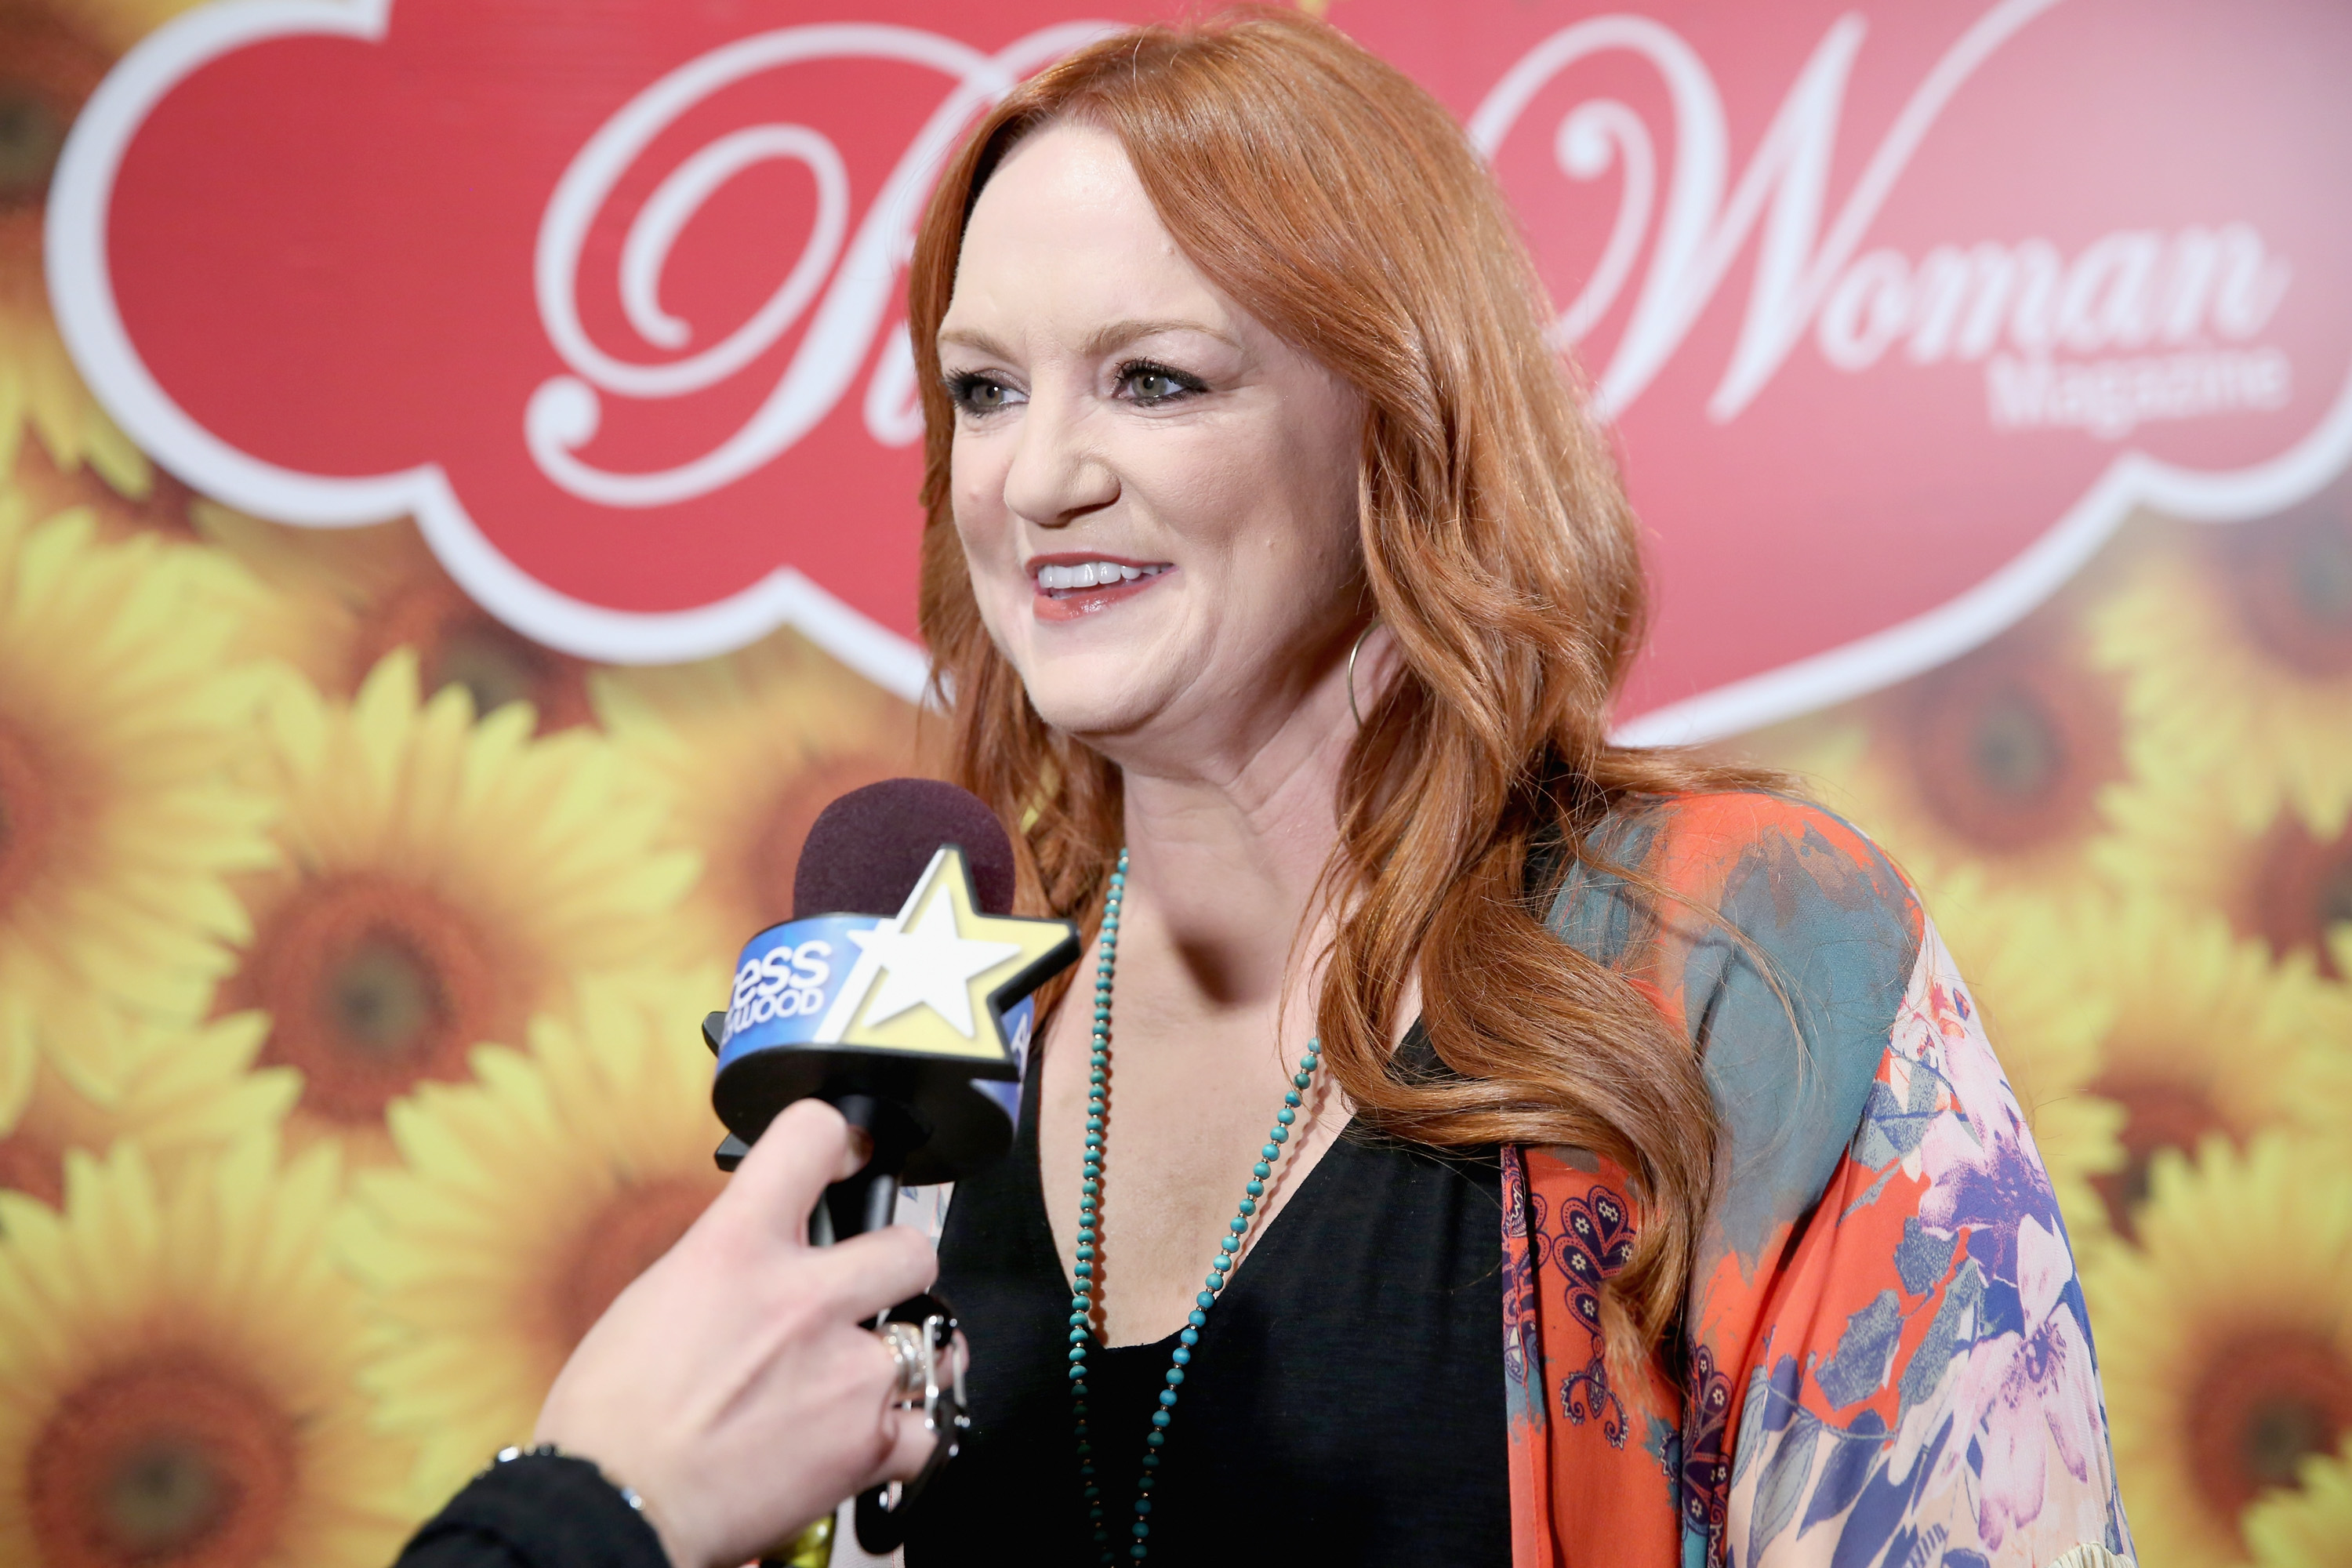 Ree Drummond talks to a reporter at a Pioneer Woman event.